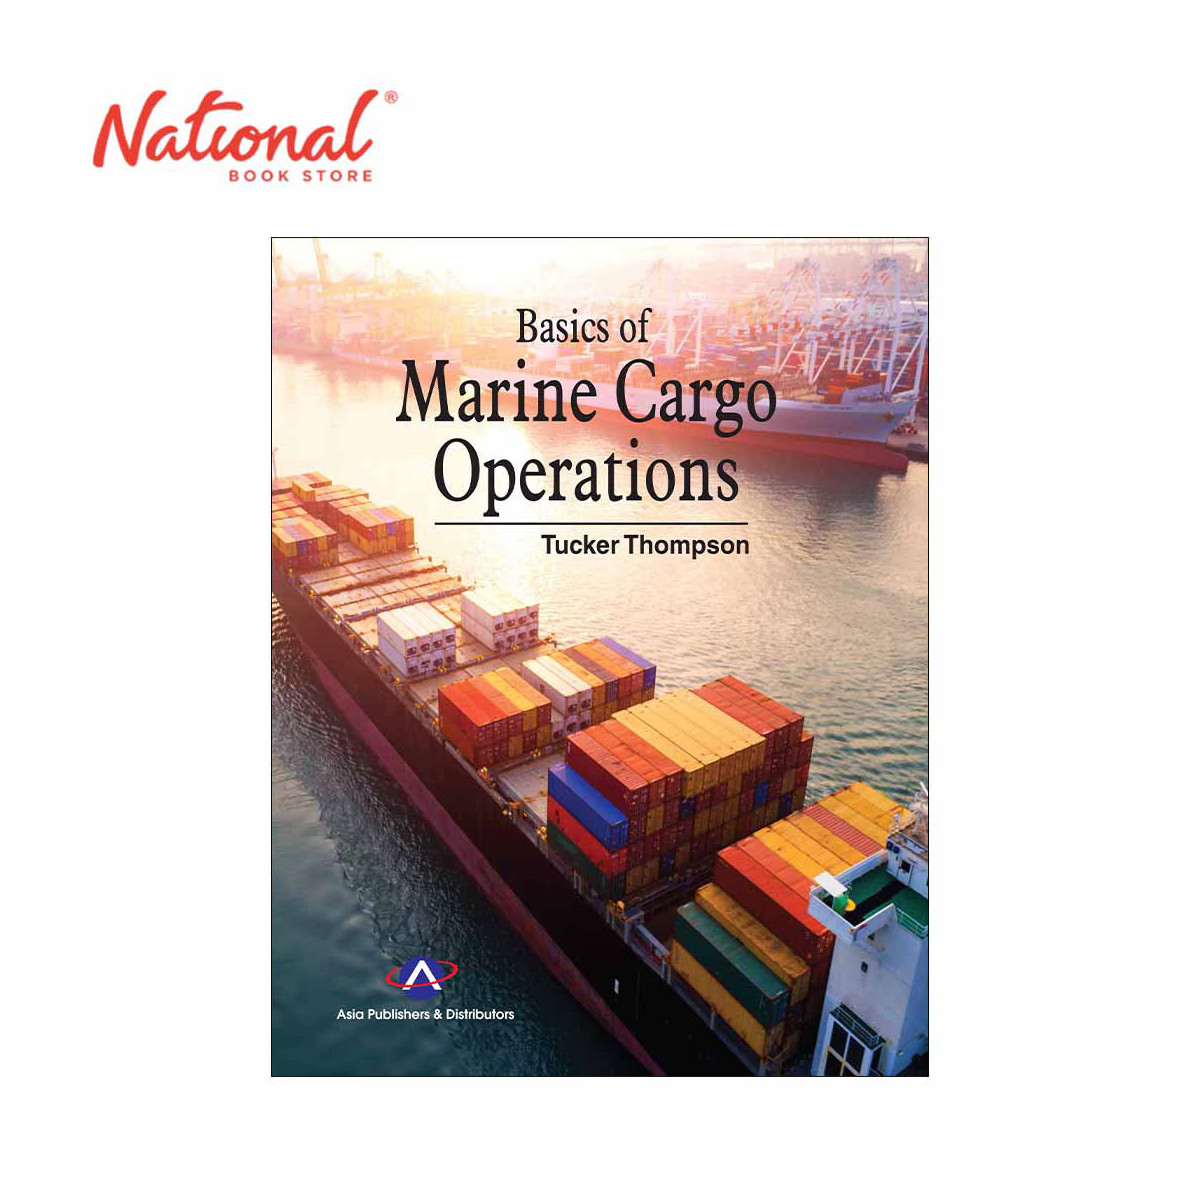 Basics of Marine Cargo Operations by Tucker Thompson - Trade Paperback - College